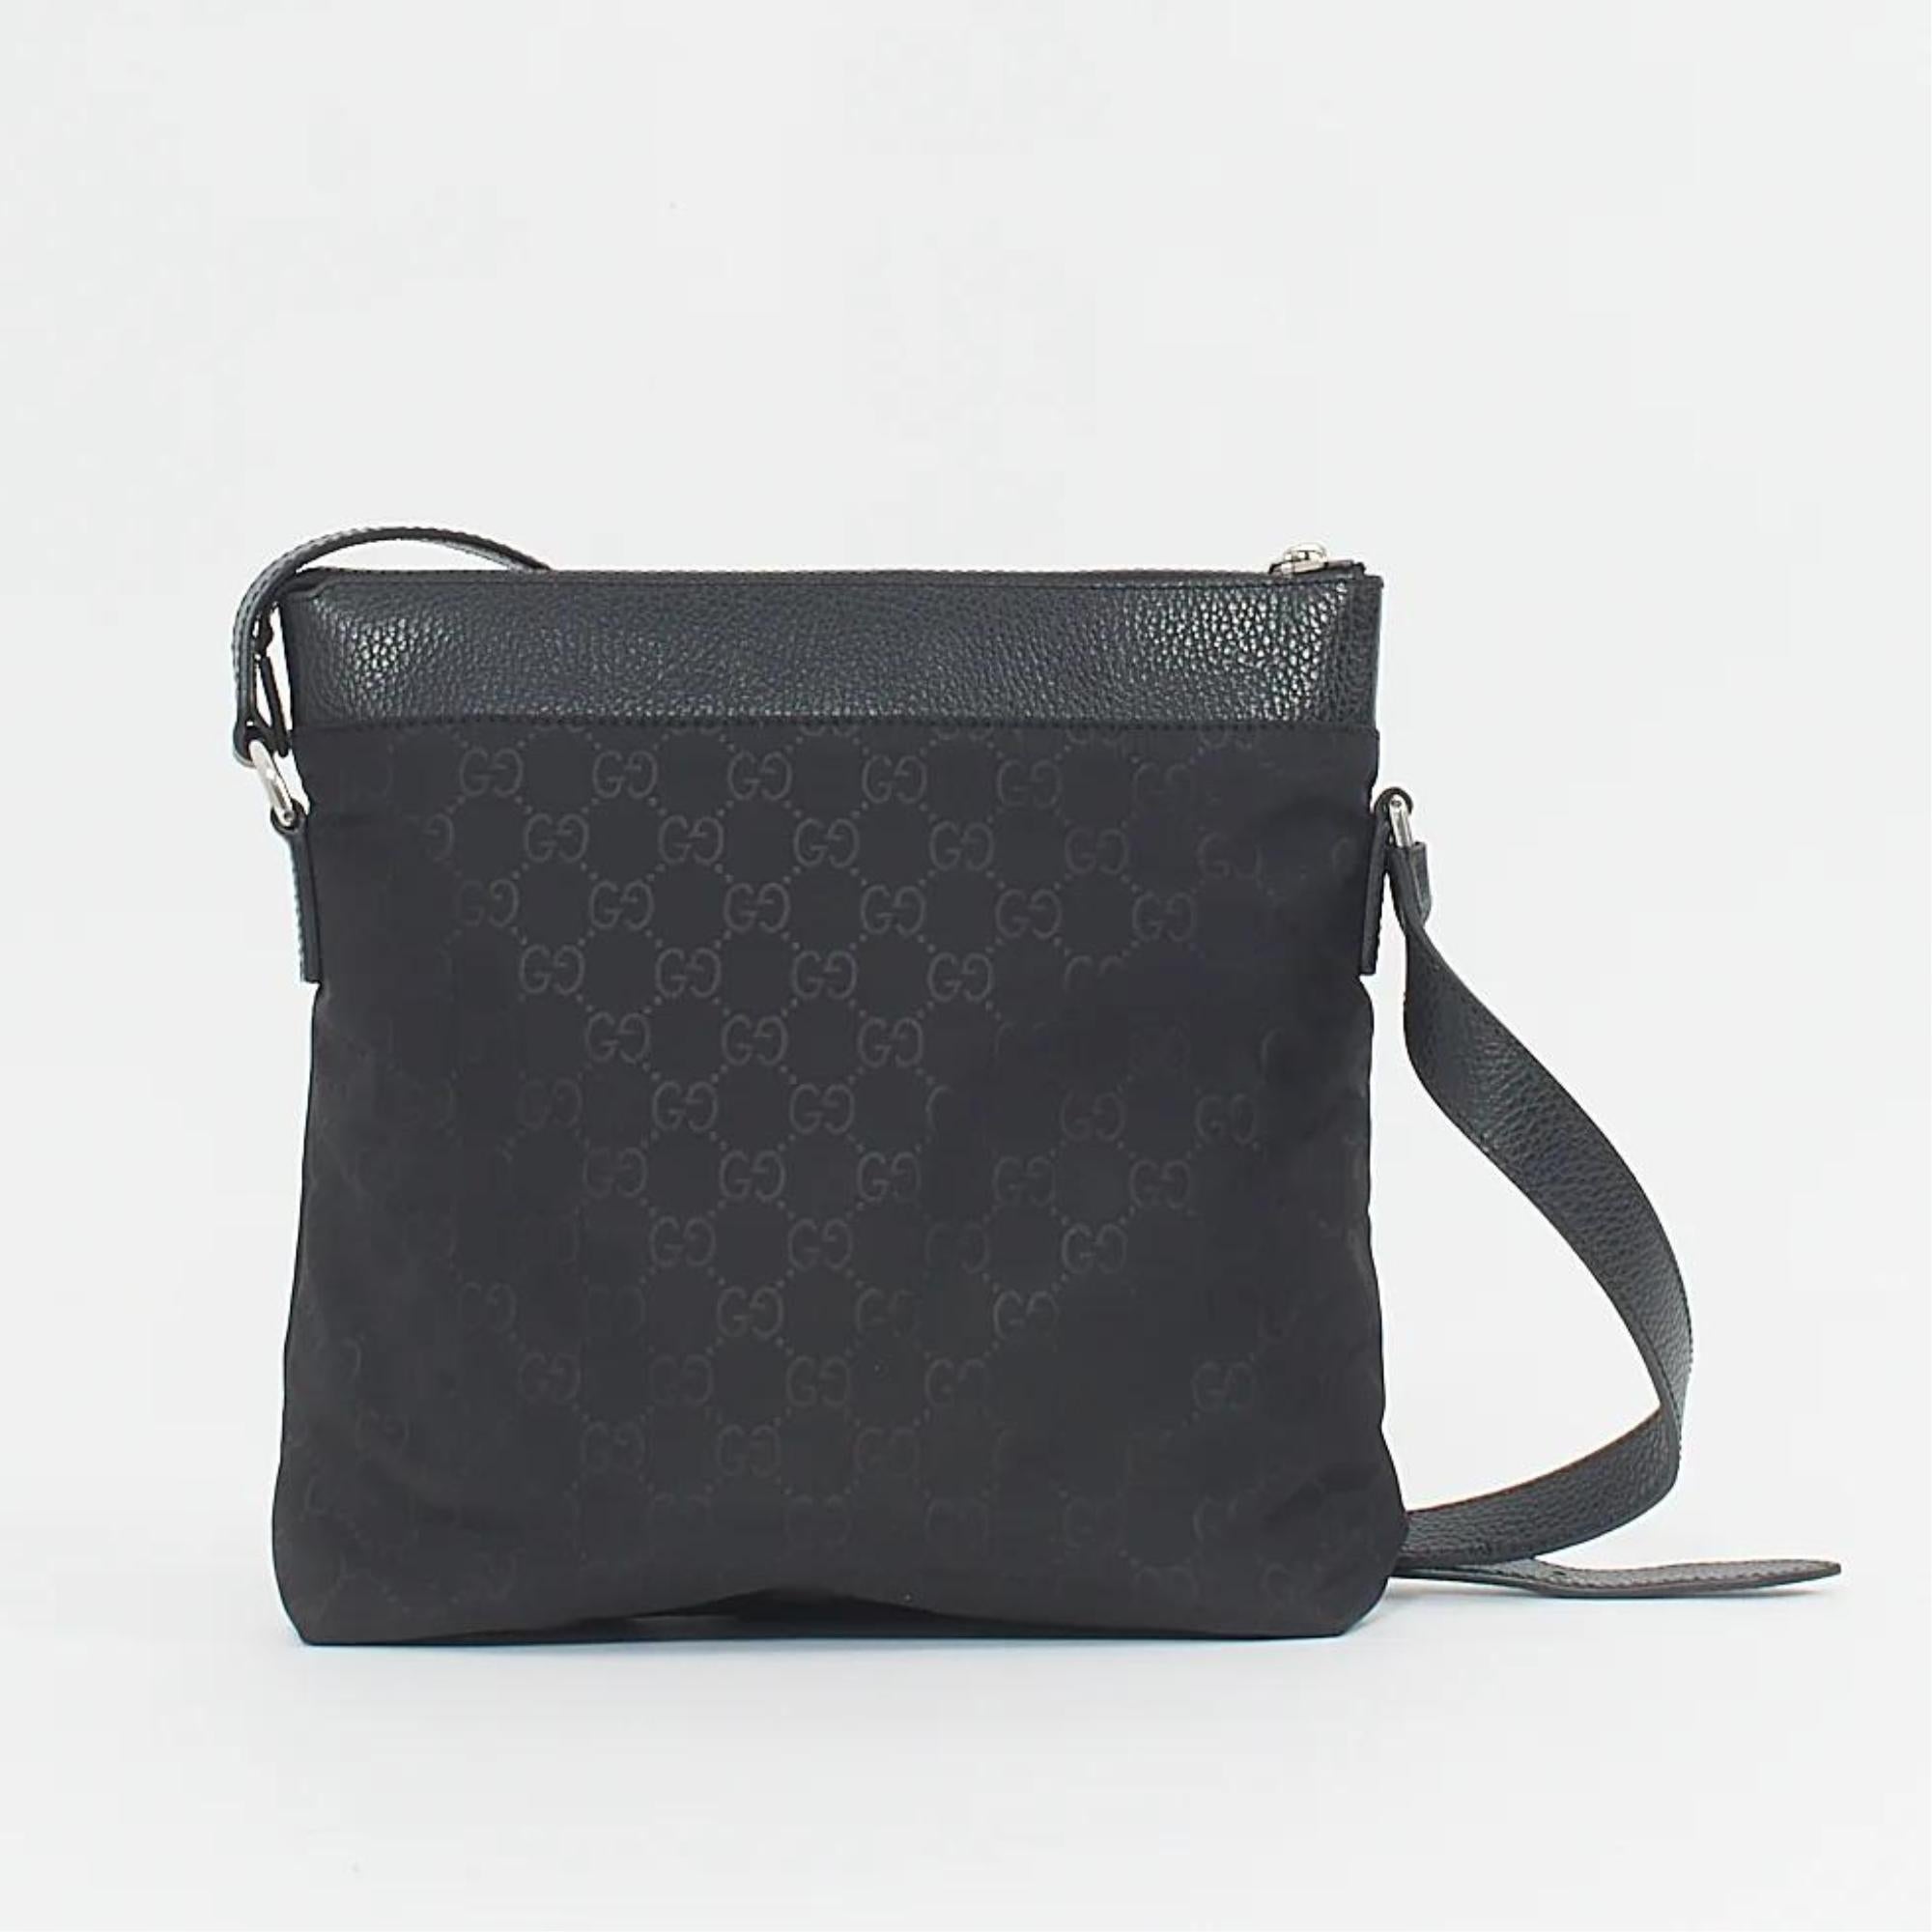 Gucci Black Nylon With Leather Trim Messenger Bag In Good Condition For Sale In Montreal, Quebec